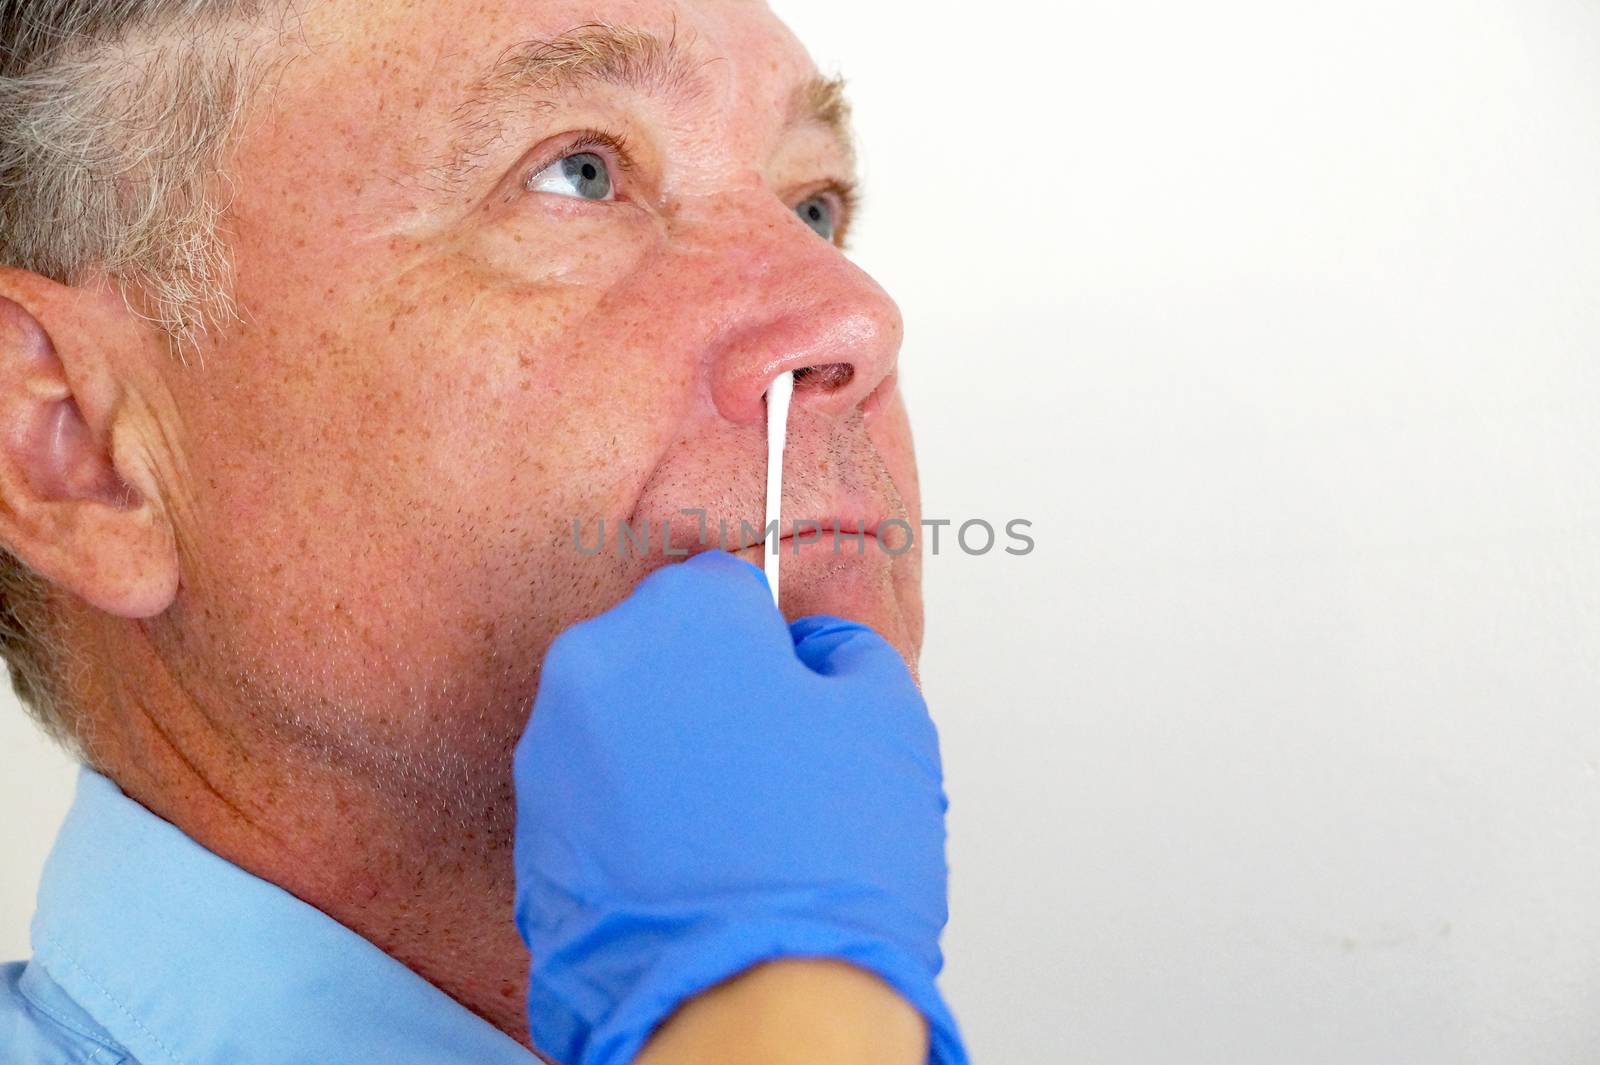 the doctor takes a test for coronavirus from the man's nose close up